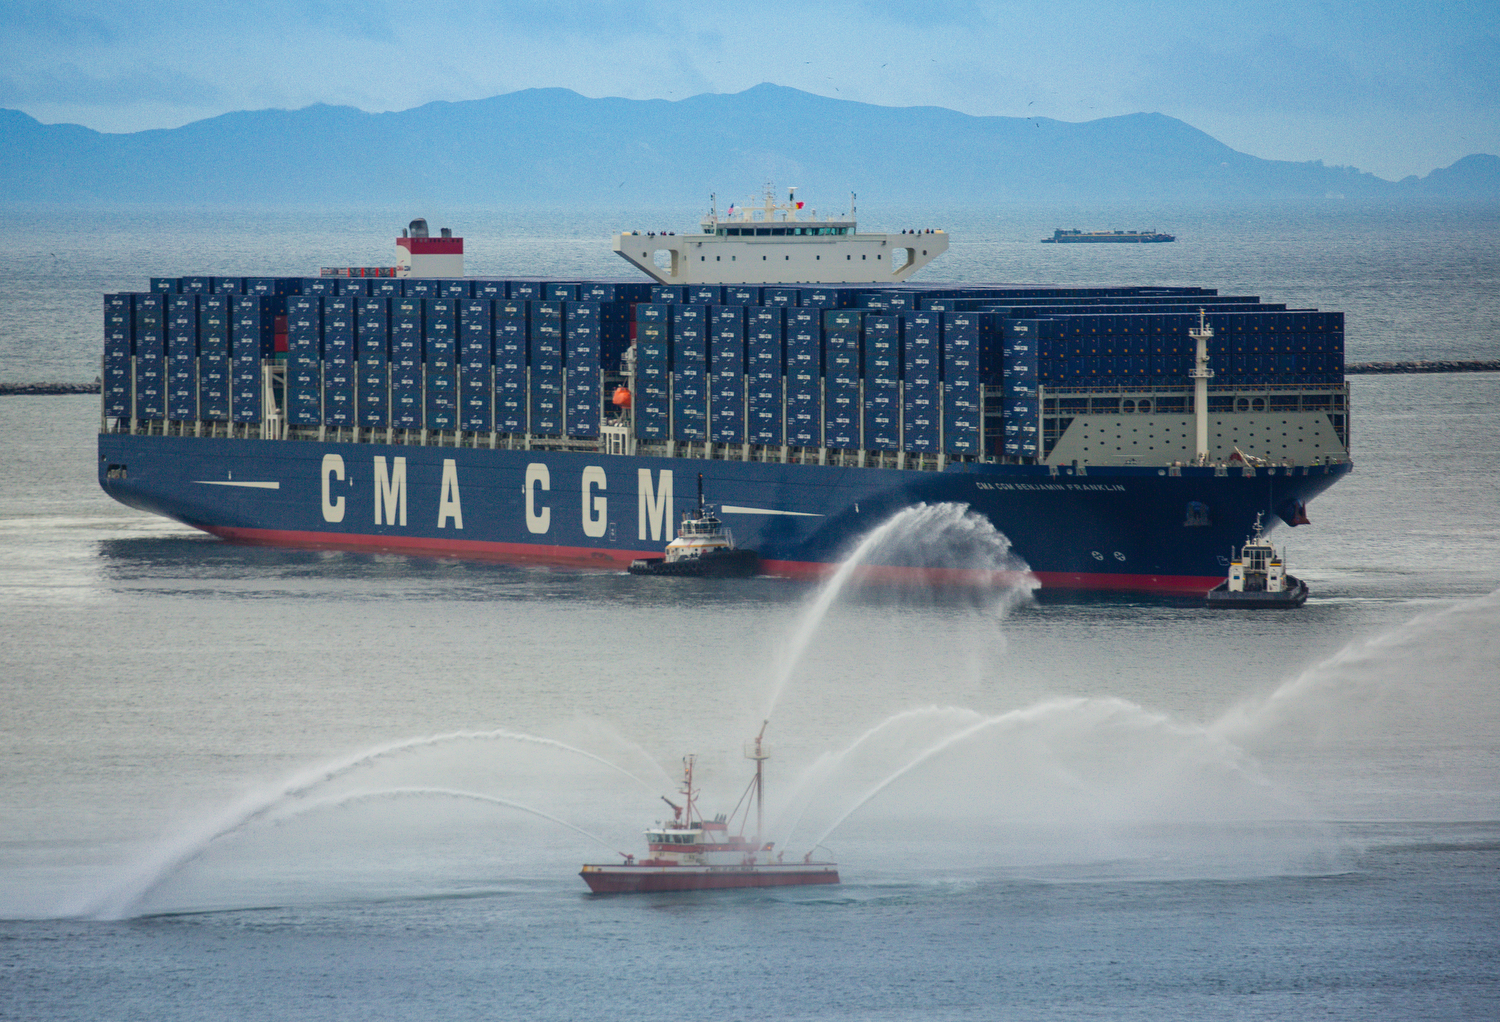 Just four years later in 2016, the CMA CGM Benjamin Franklin, an 18,000-TEU vessel, comes to Pier J.